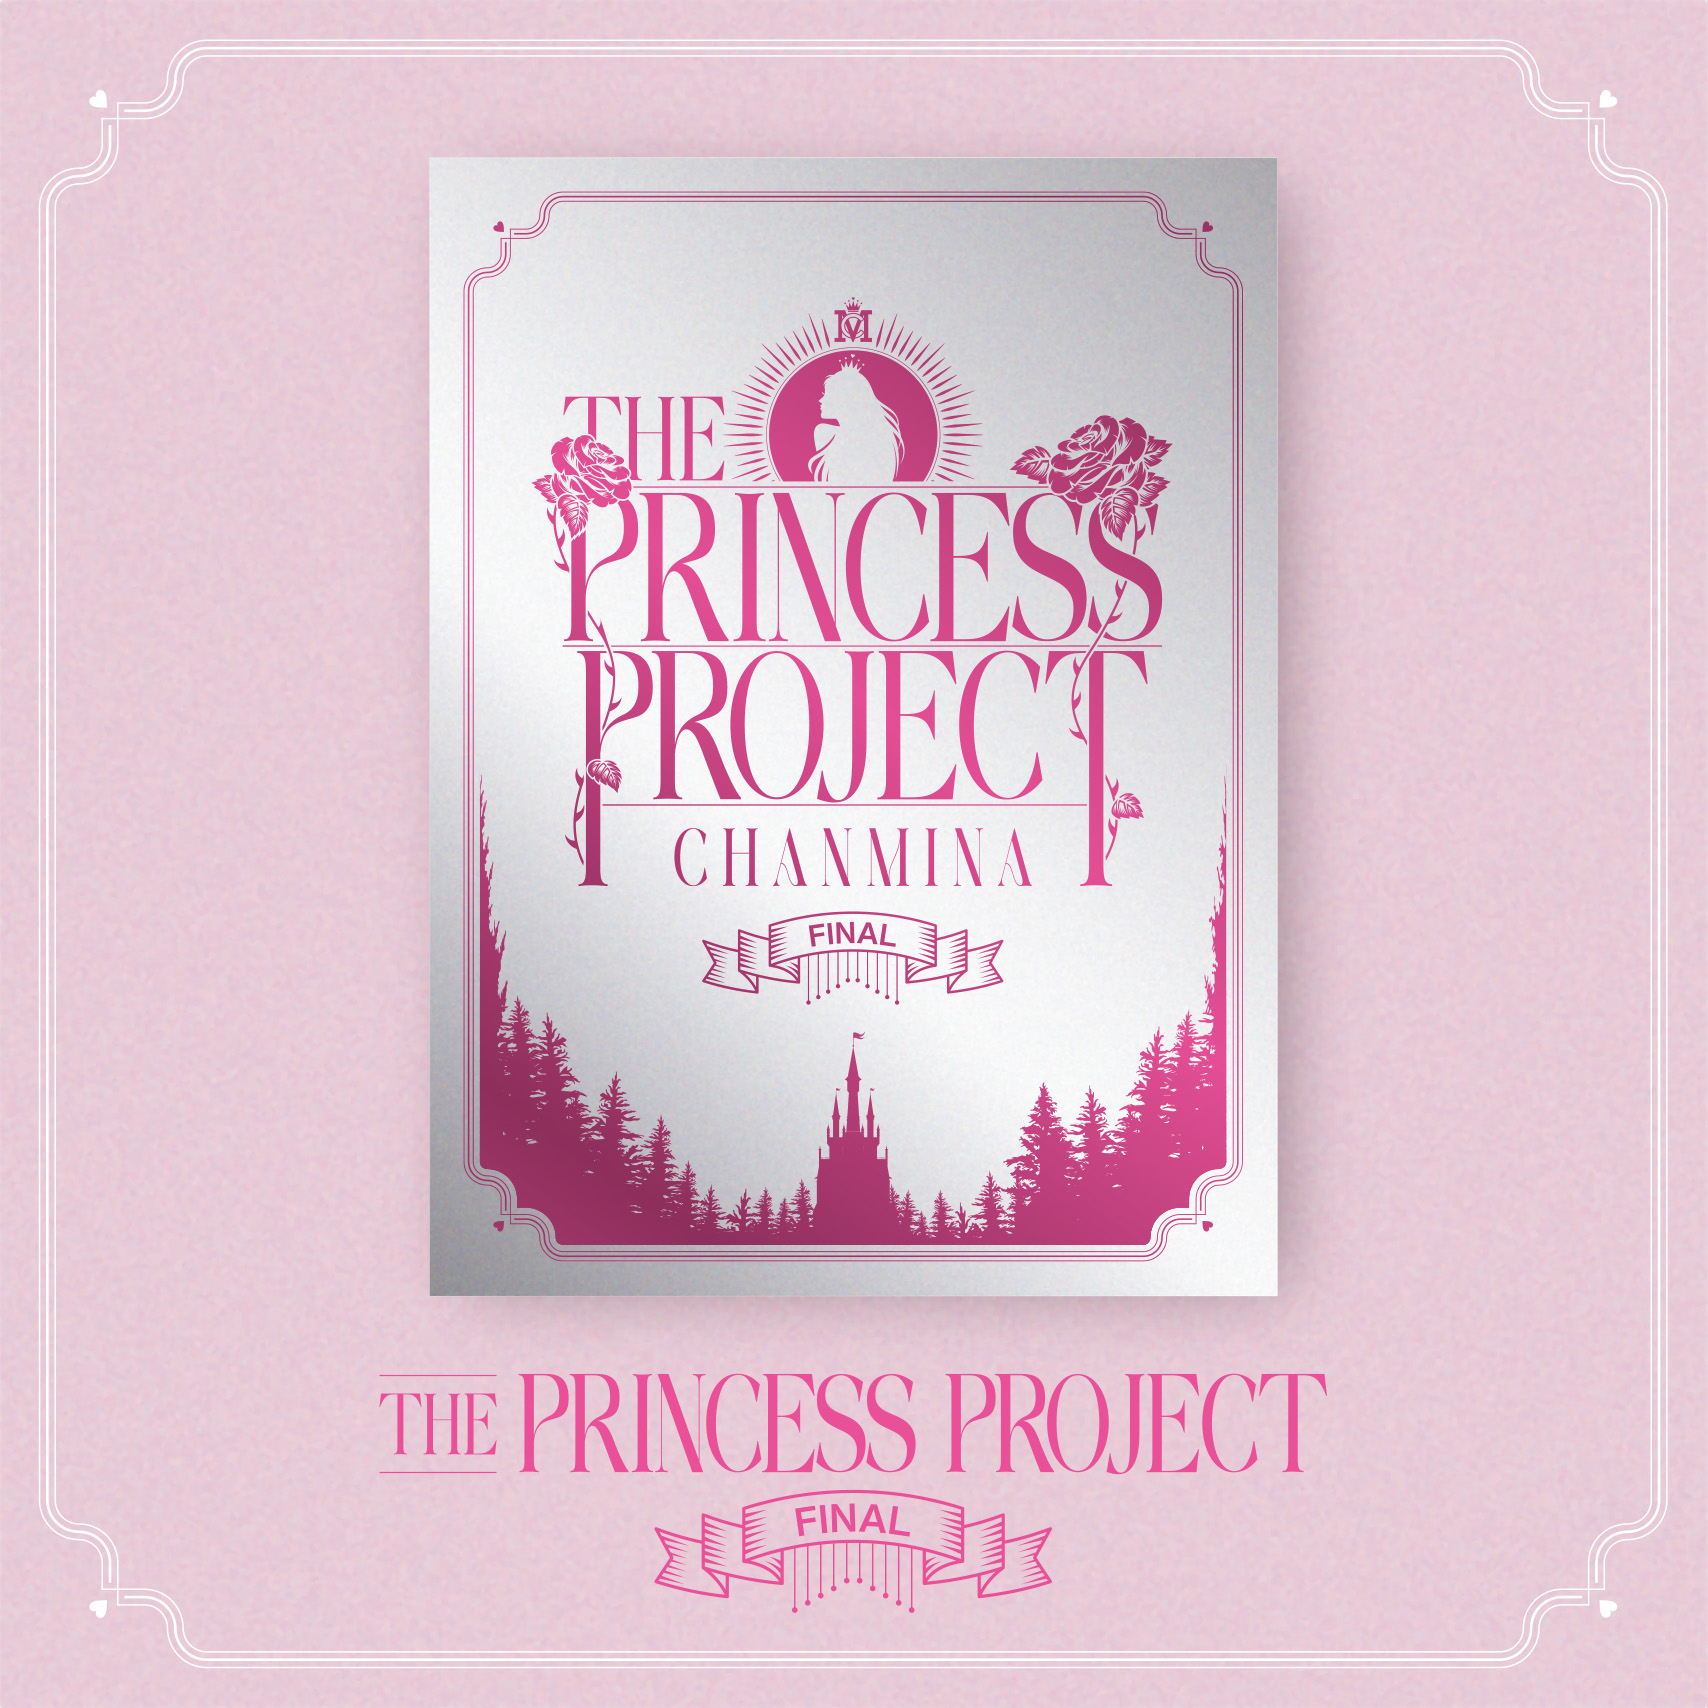 「THE PRINCESS PROJECT - FINAL -」